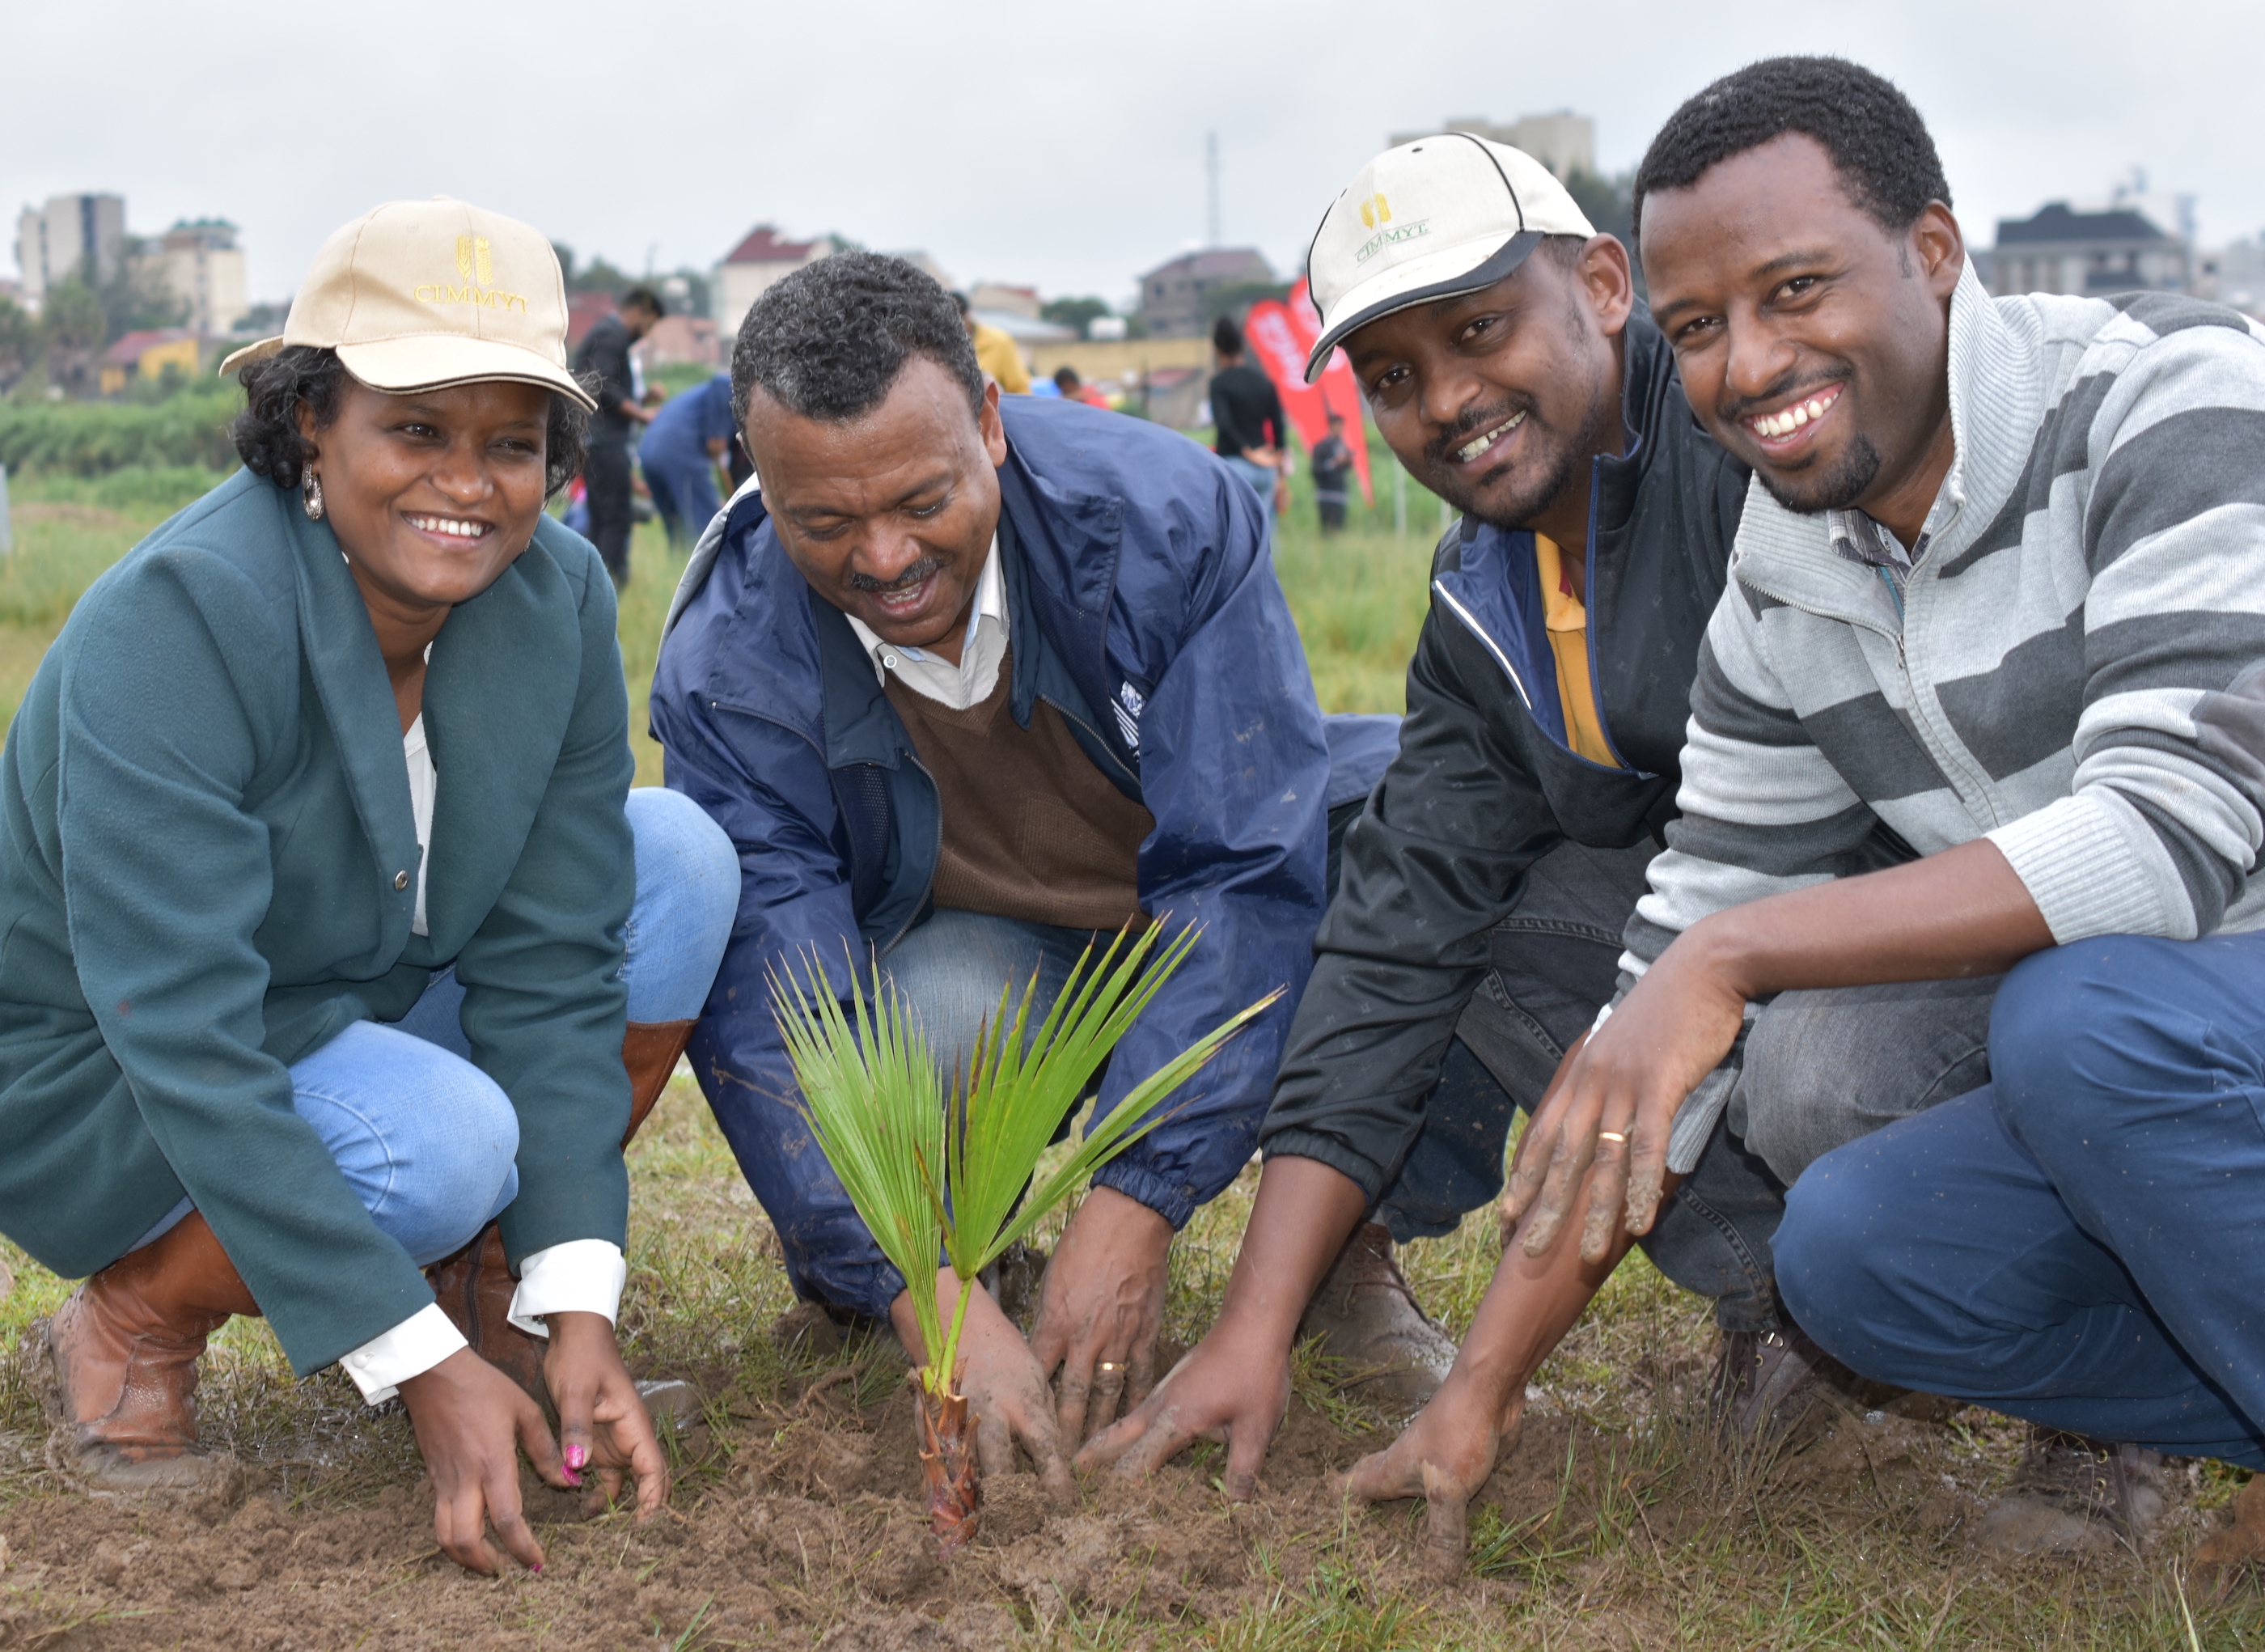 Staff members of CIMMYT and other CGIAR centers in Ethiopia participated in the country's nationwide campaign that resulted in the planting of more than 350 million trees in one single day. (Photo: CIMMYT)